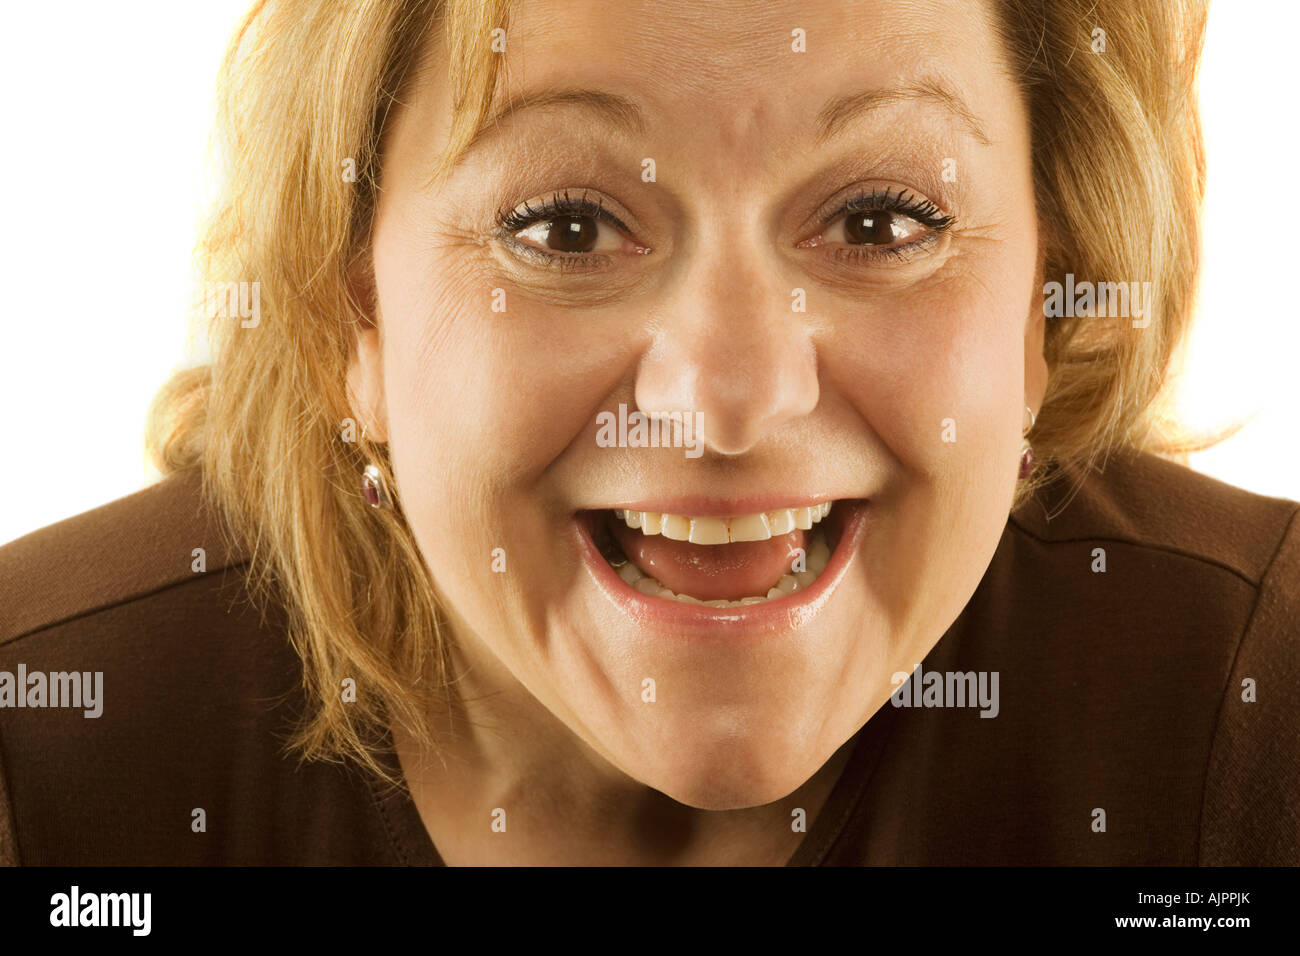 Woman making silly face Stock Photo